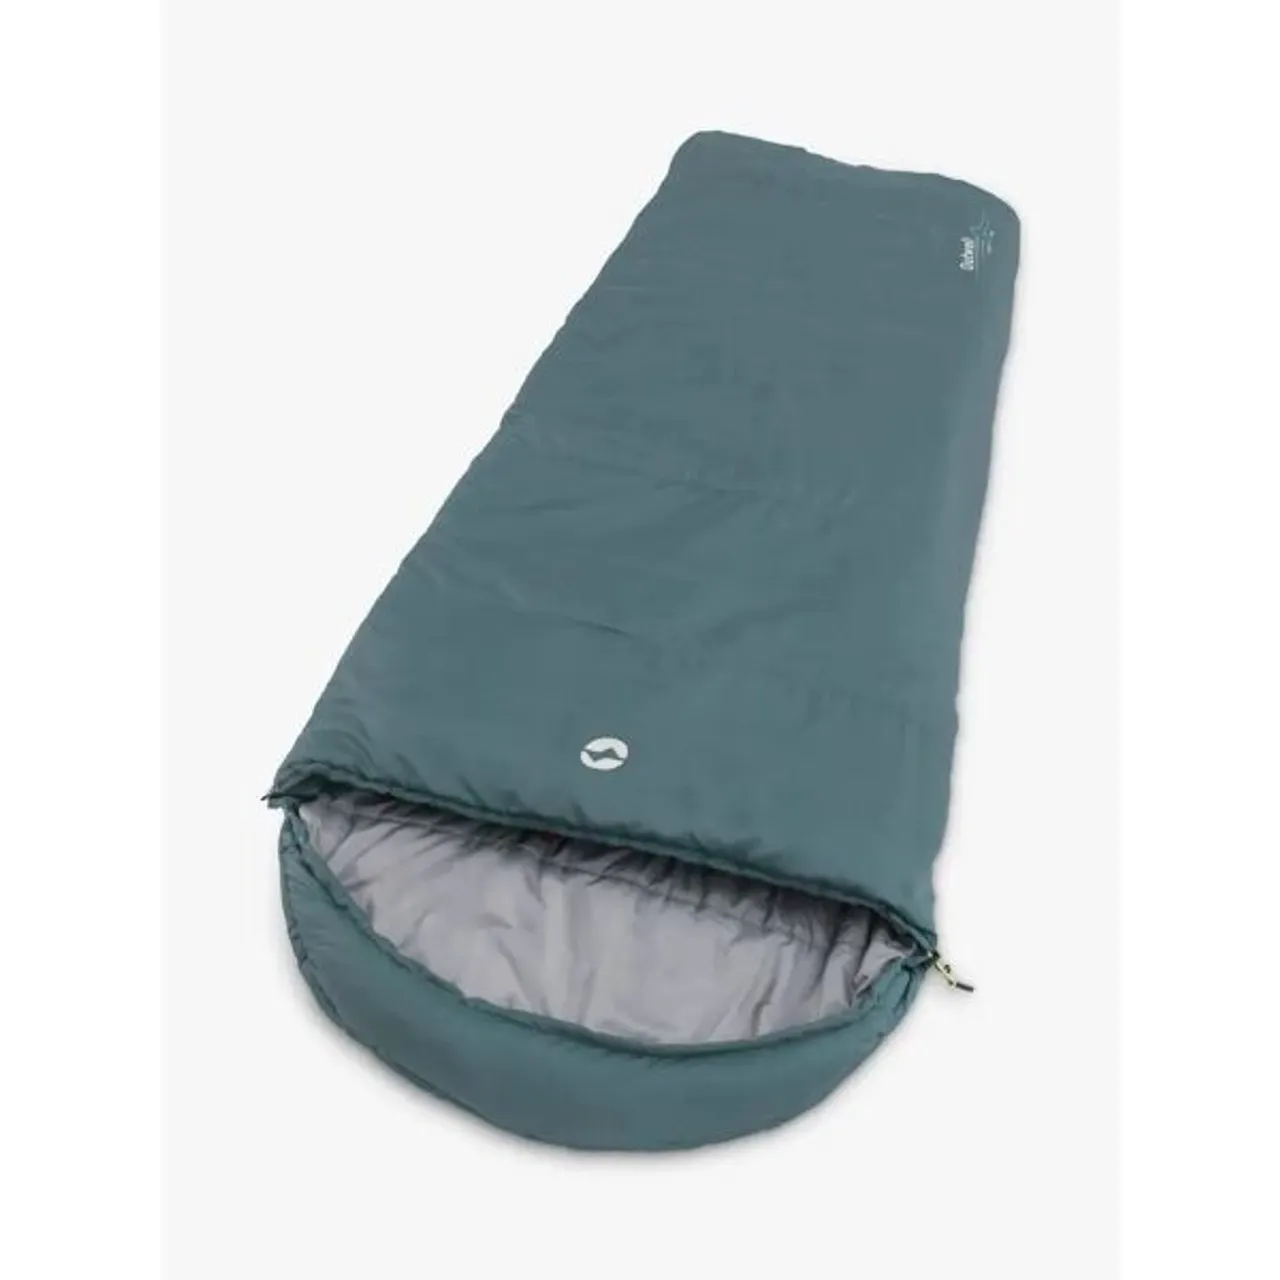 Outwell Campion Lux Single Sleeping Bag - Mid Green - Unisex - Size: Single